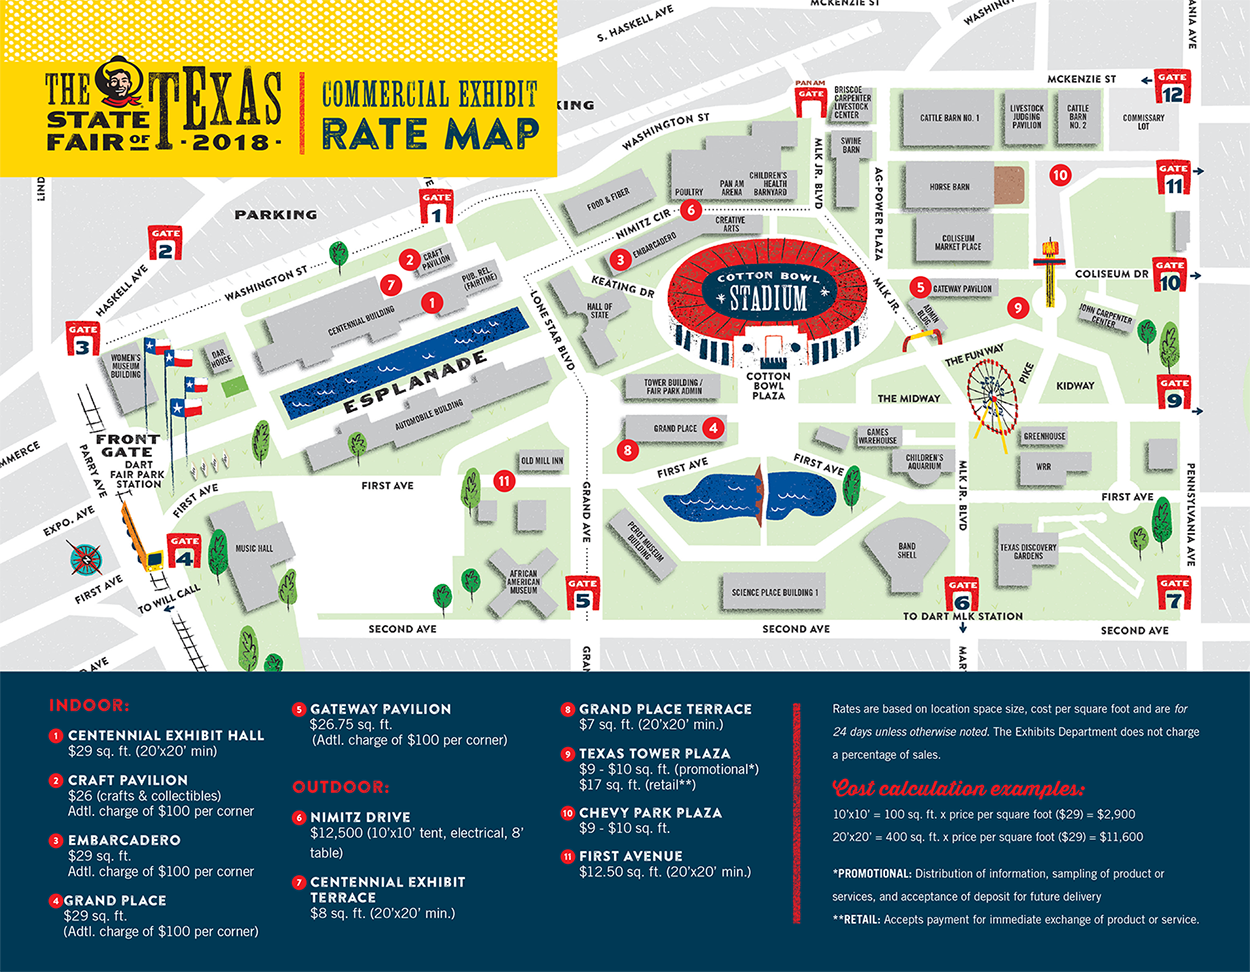 texas state fair map 2018 Exhibitors Rate Map State Fair Of Texas texas state fair map